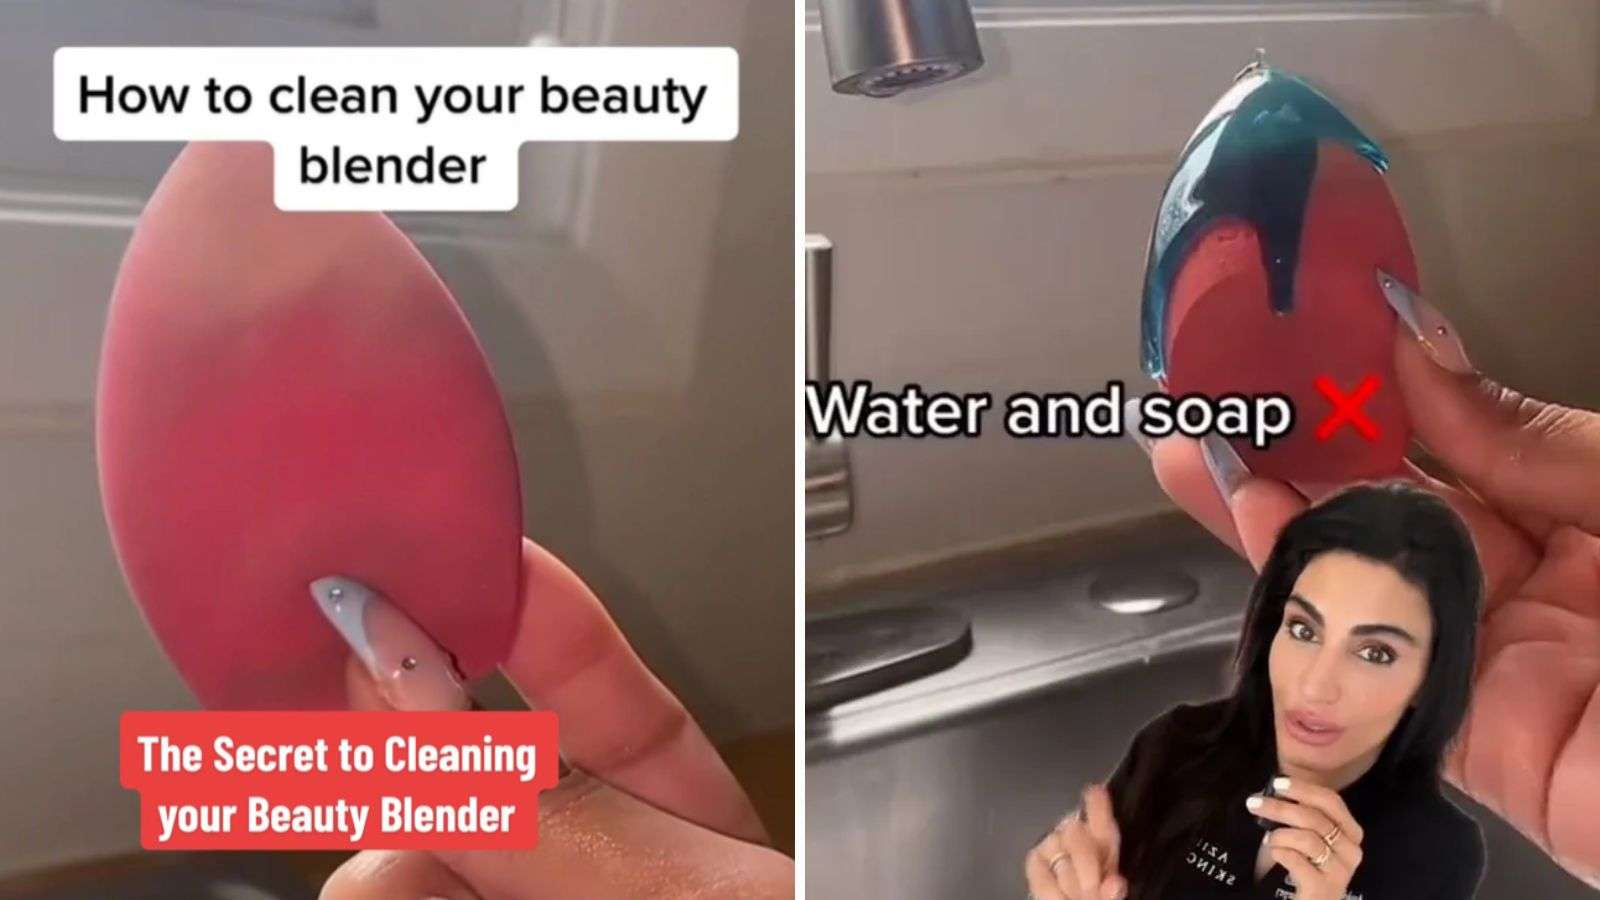 Dermatologist explains how to properly clean your beauty blender